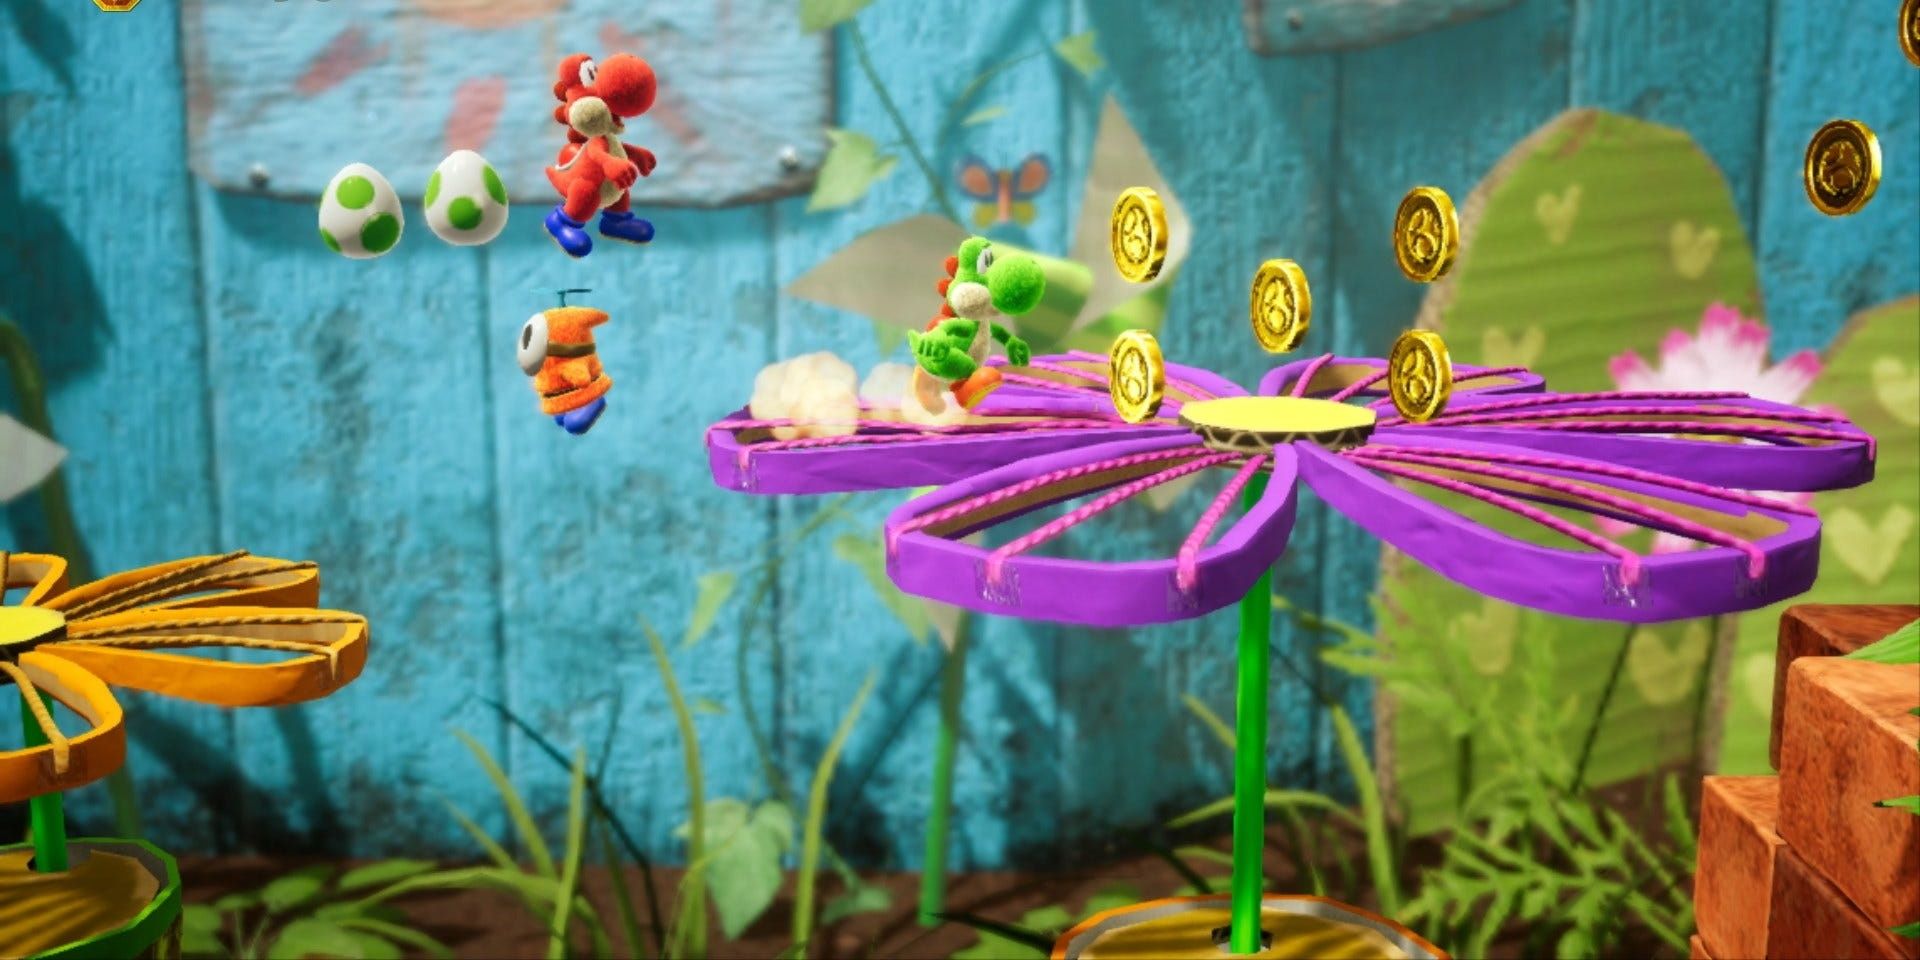 Yoshi and Red Yoshi in one of the early levels in Yoshi's Crafted World